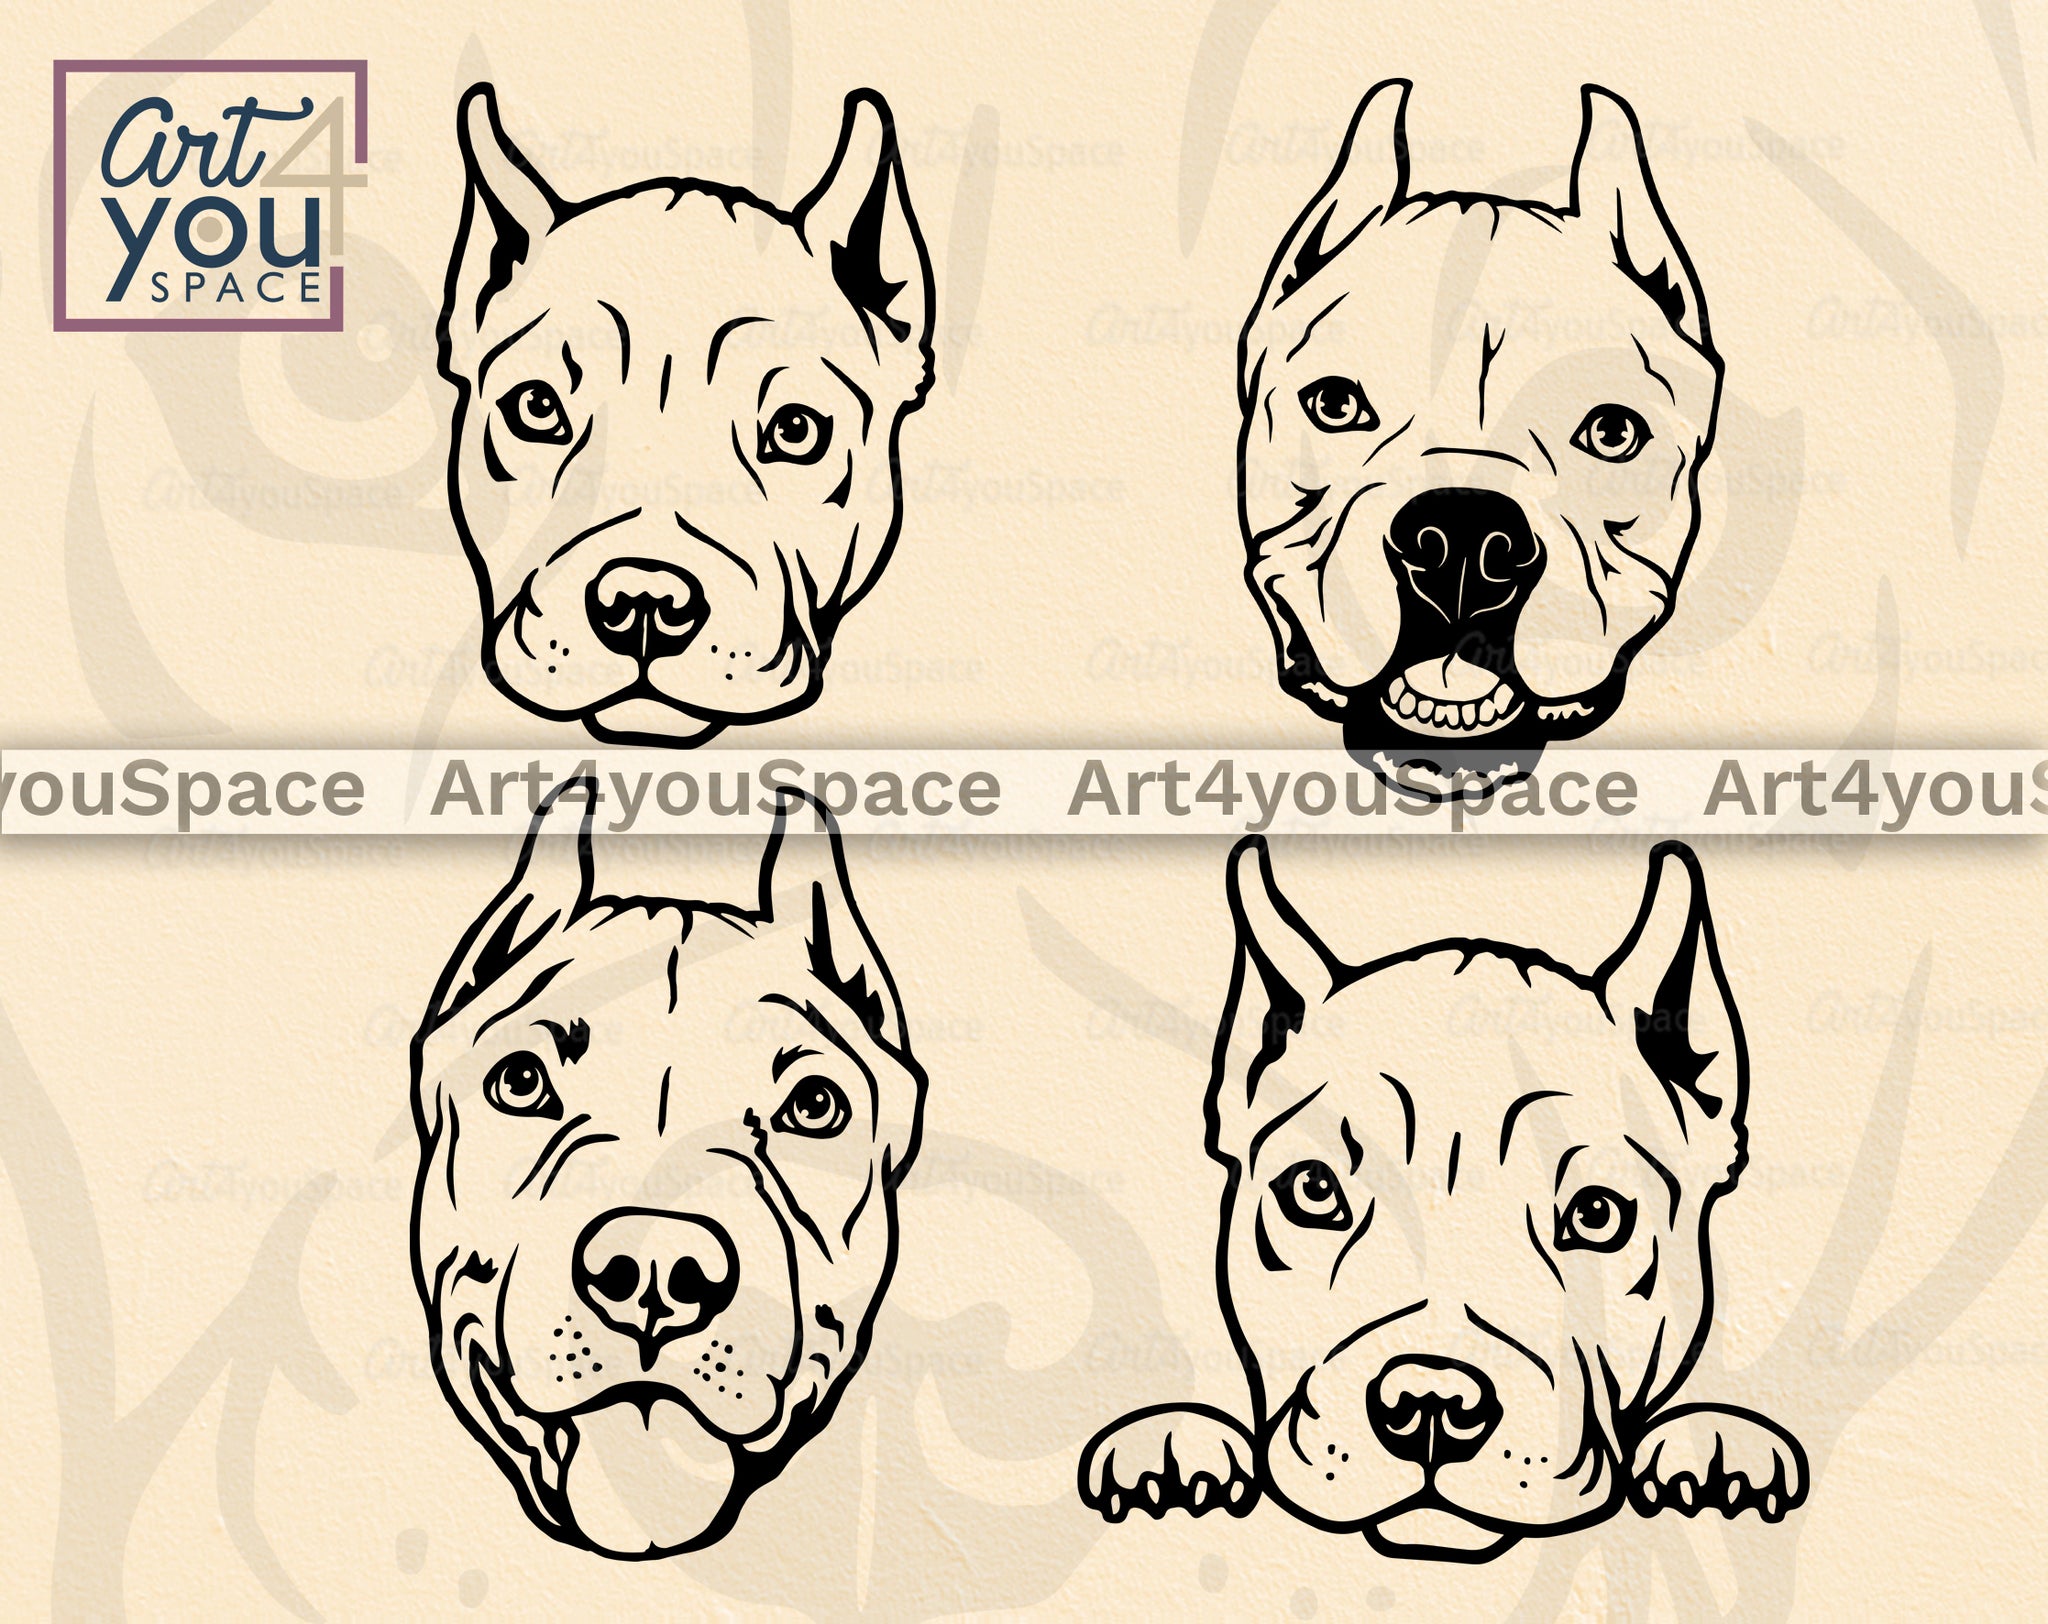 bully face clipart images